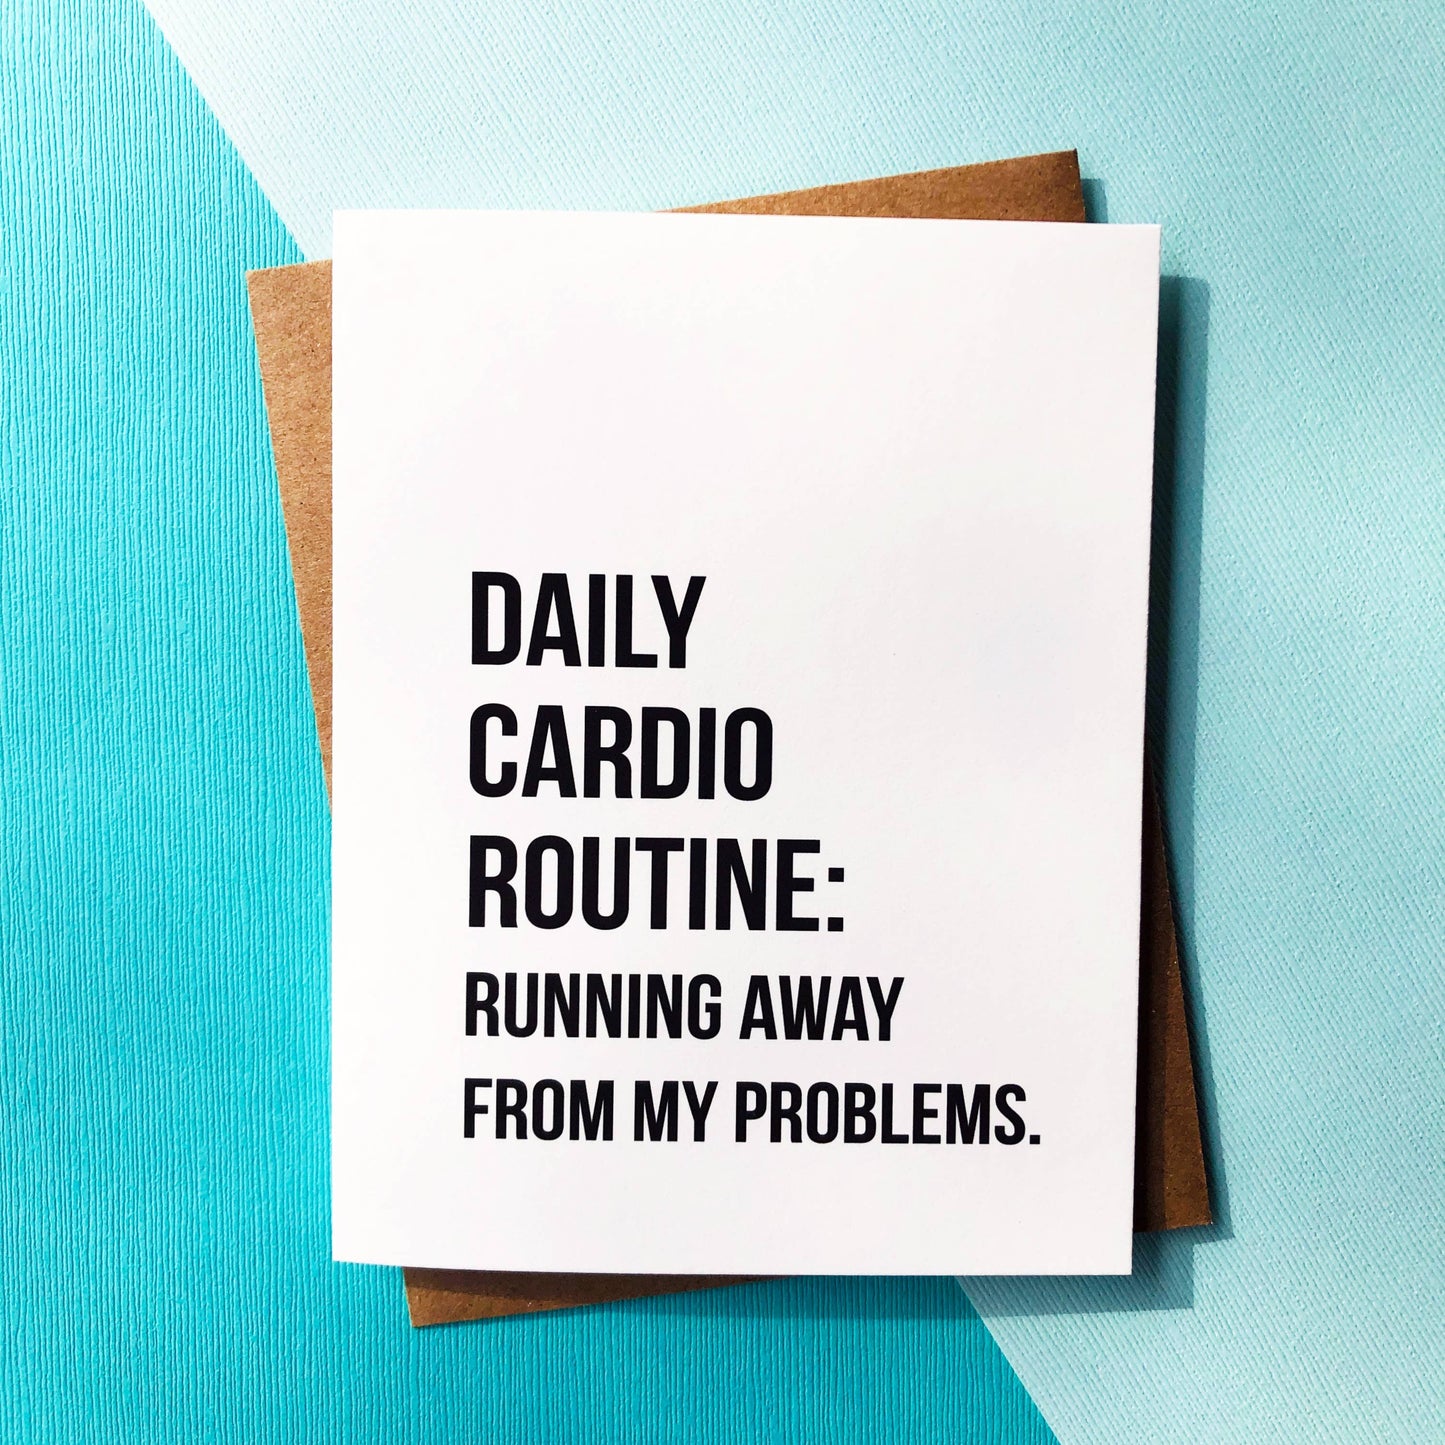 Top Hat and Monocle - Daily Cardio Routine Card